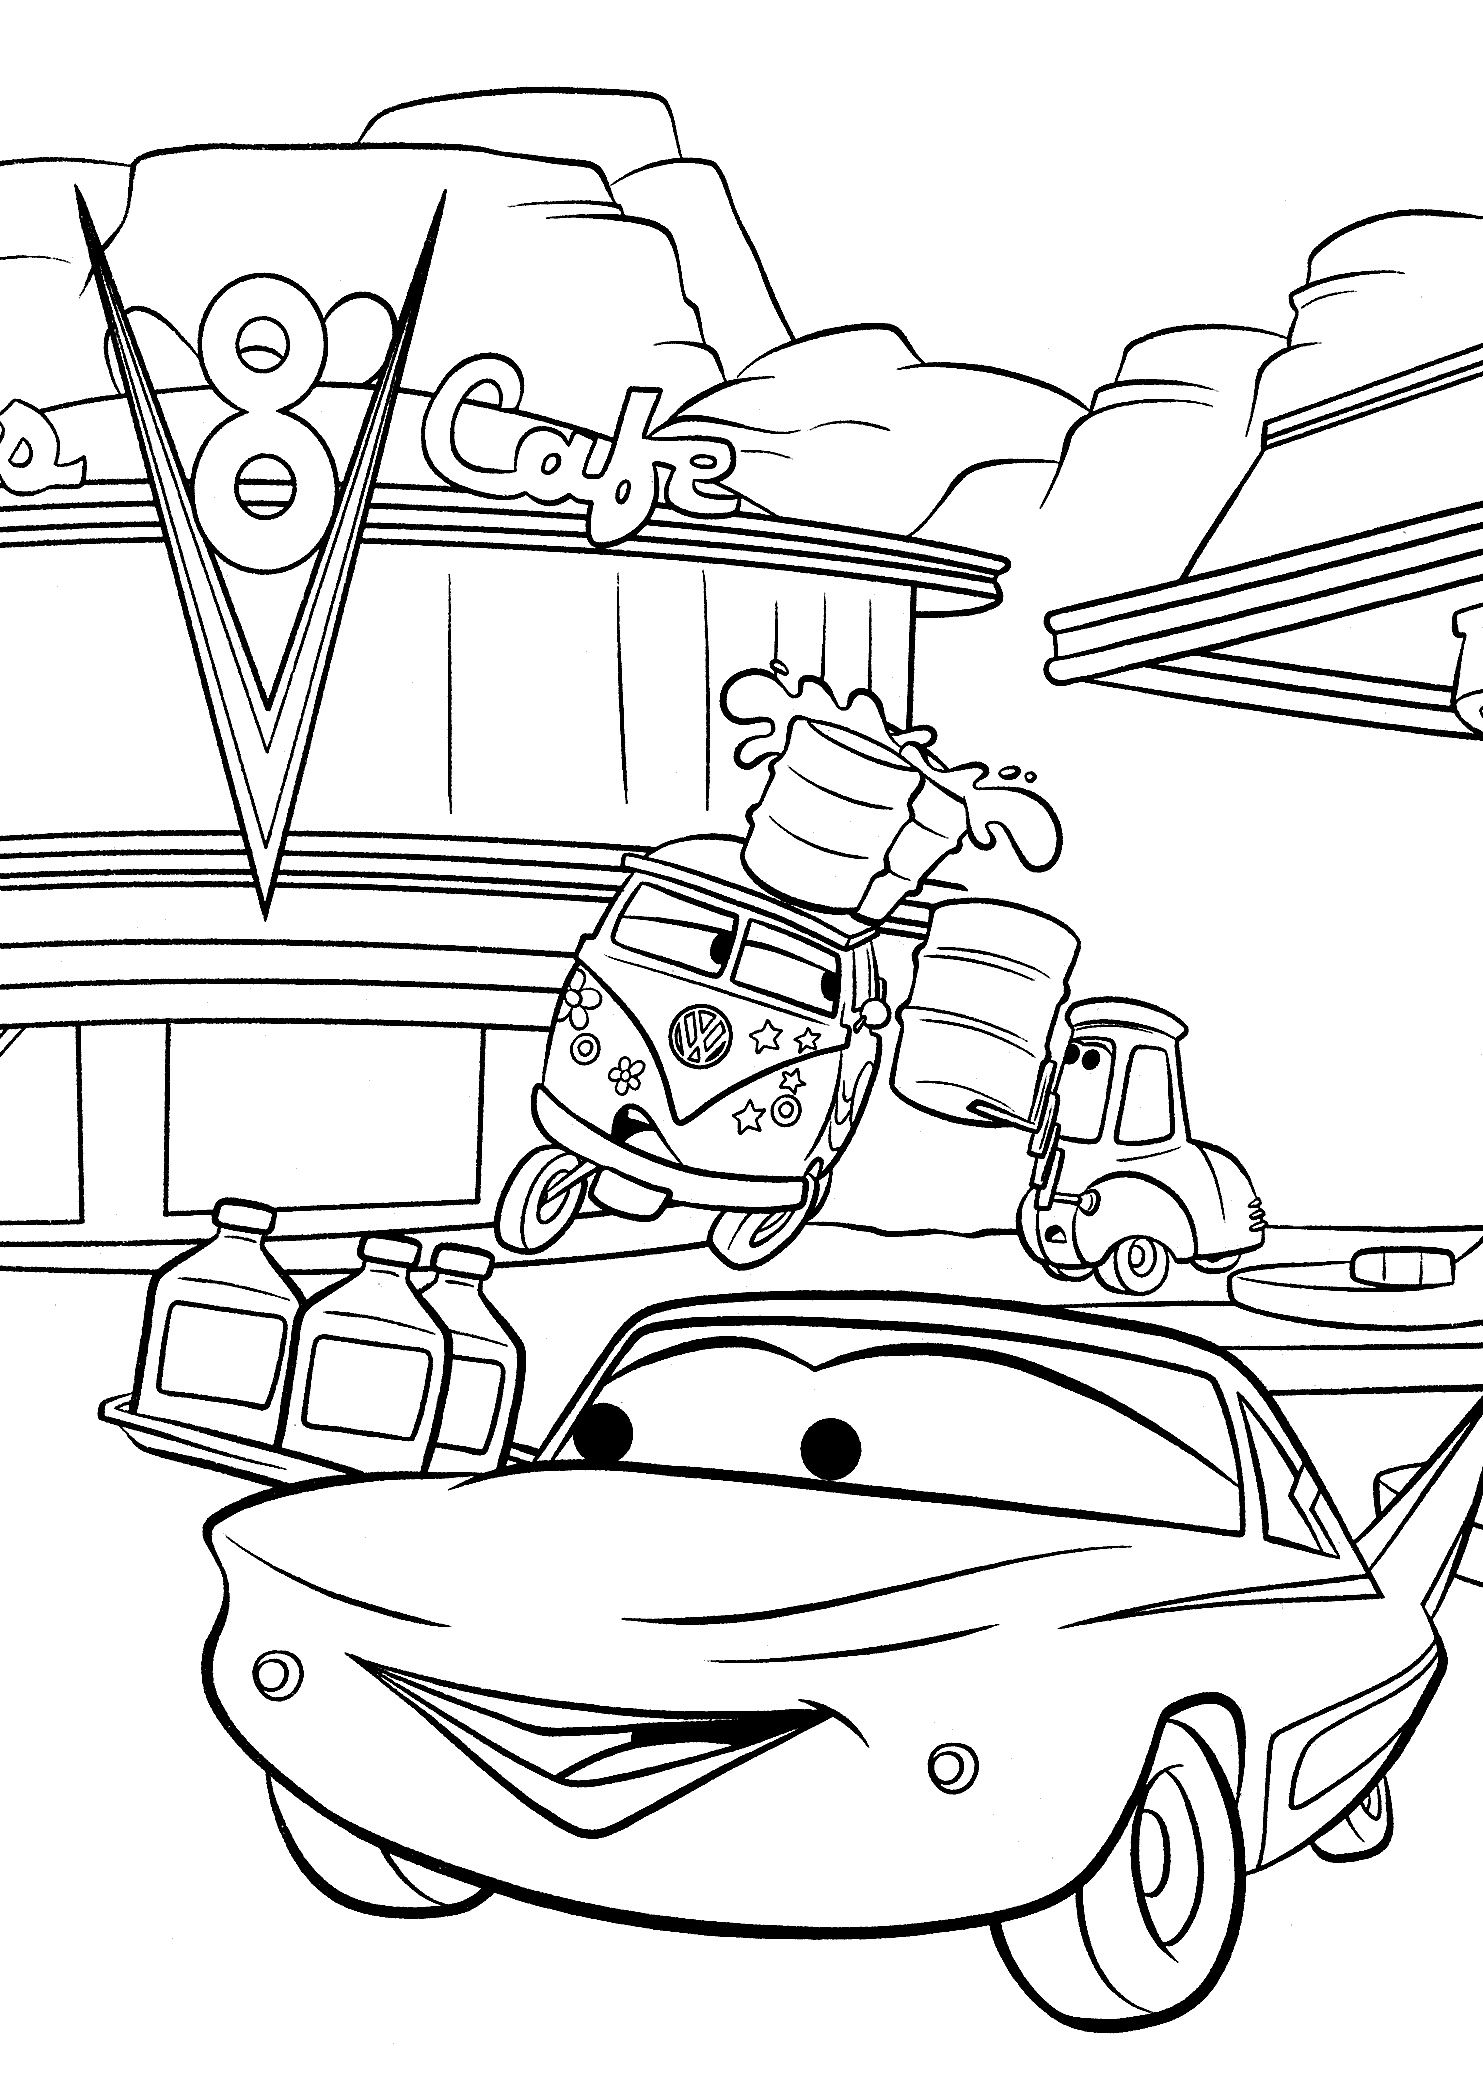 Disney Cars 2 Colouring Pictures - High Quality Coloring Pages